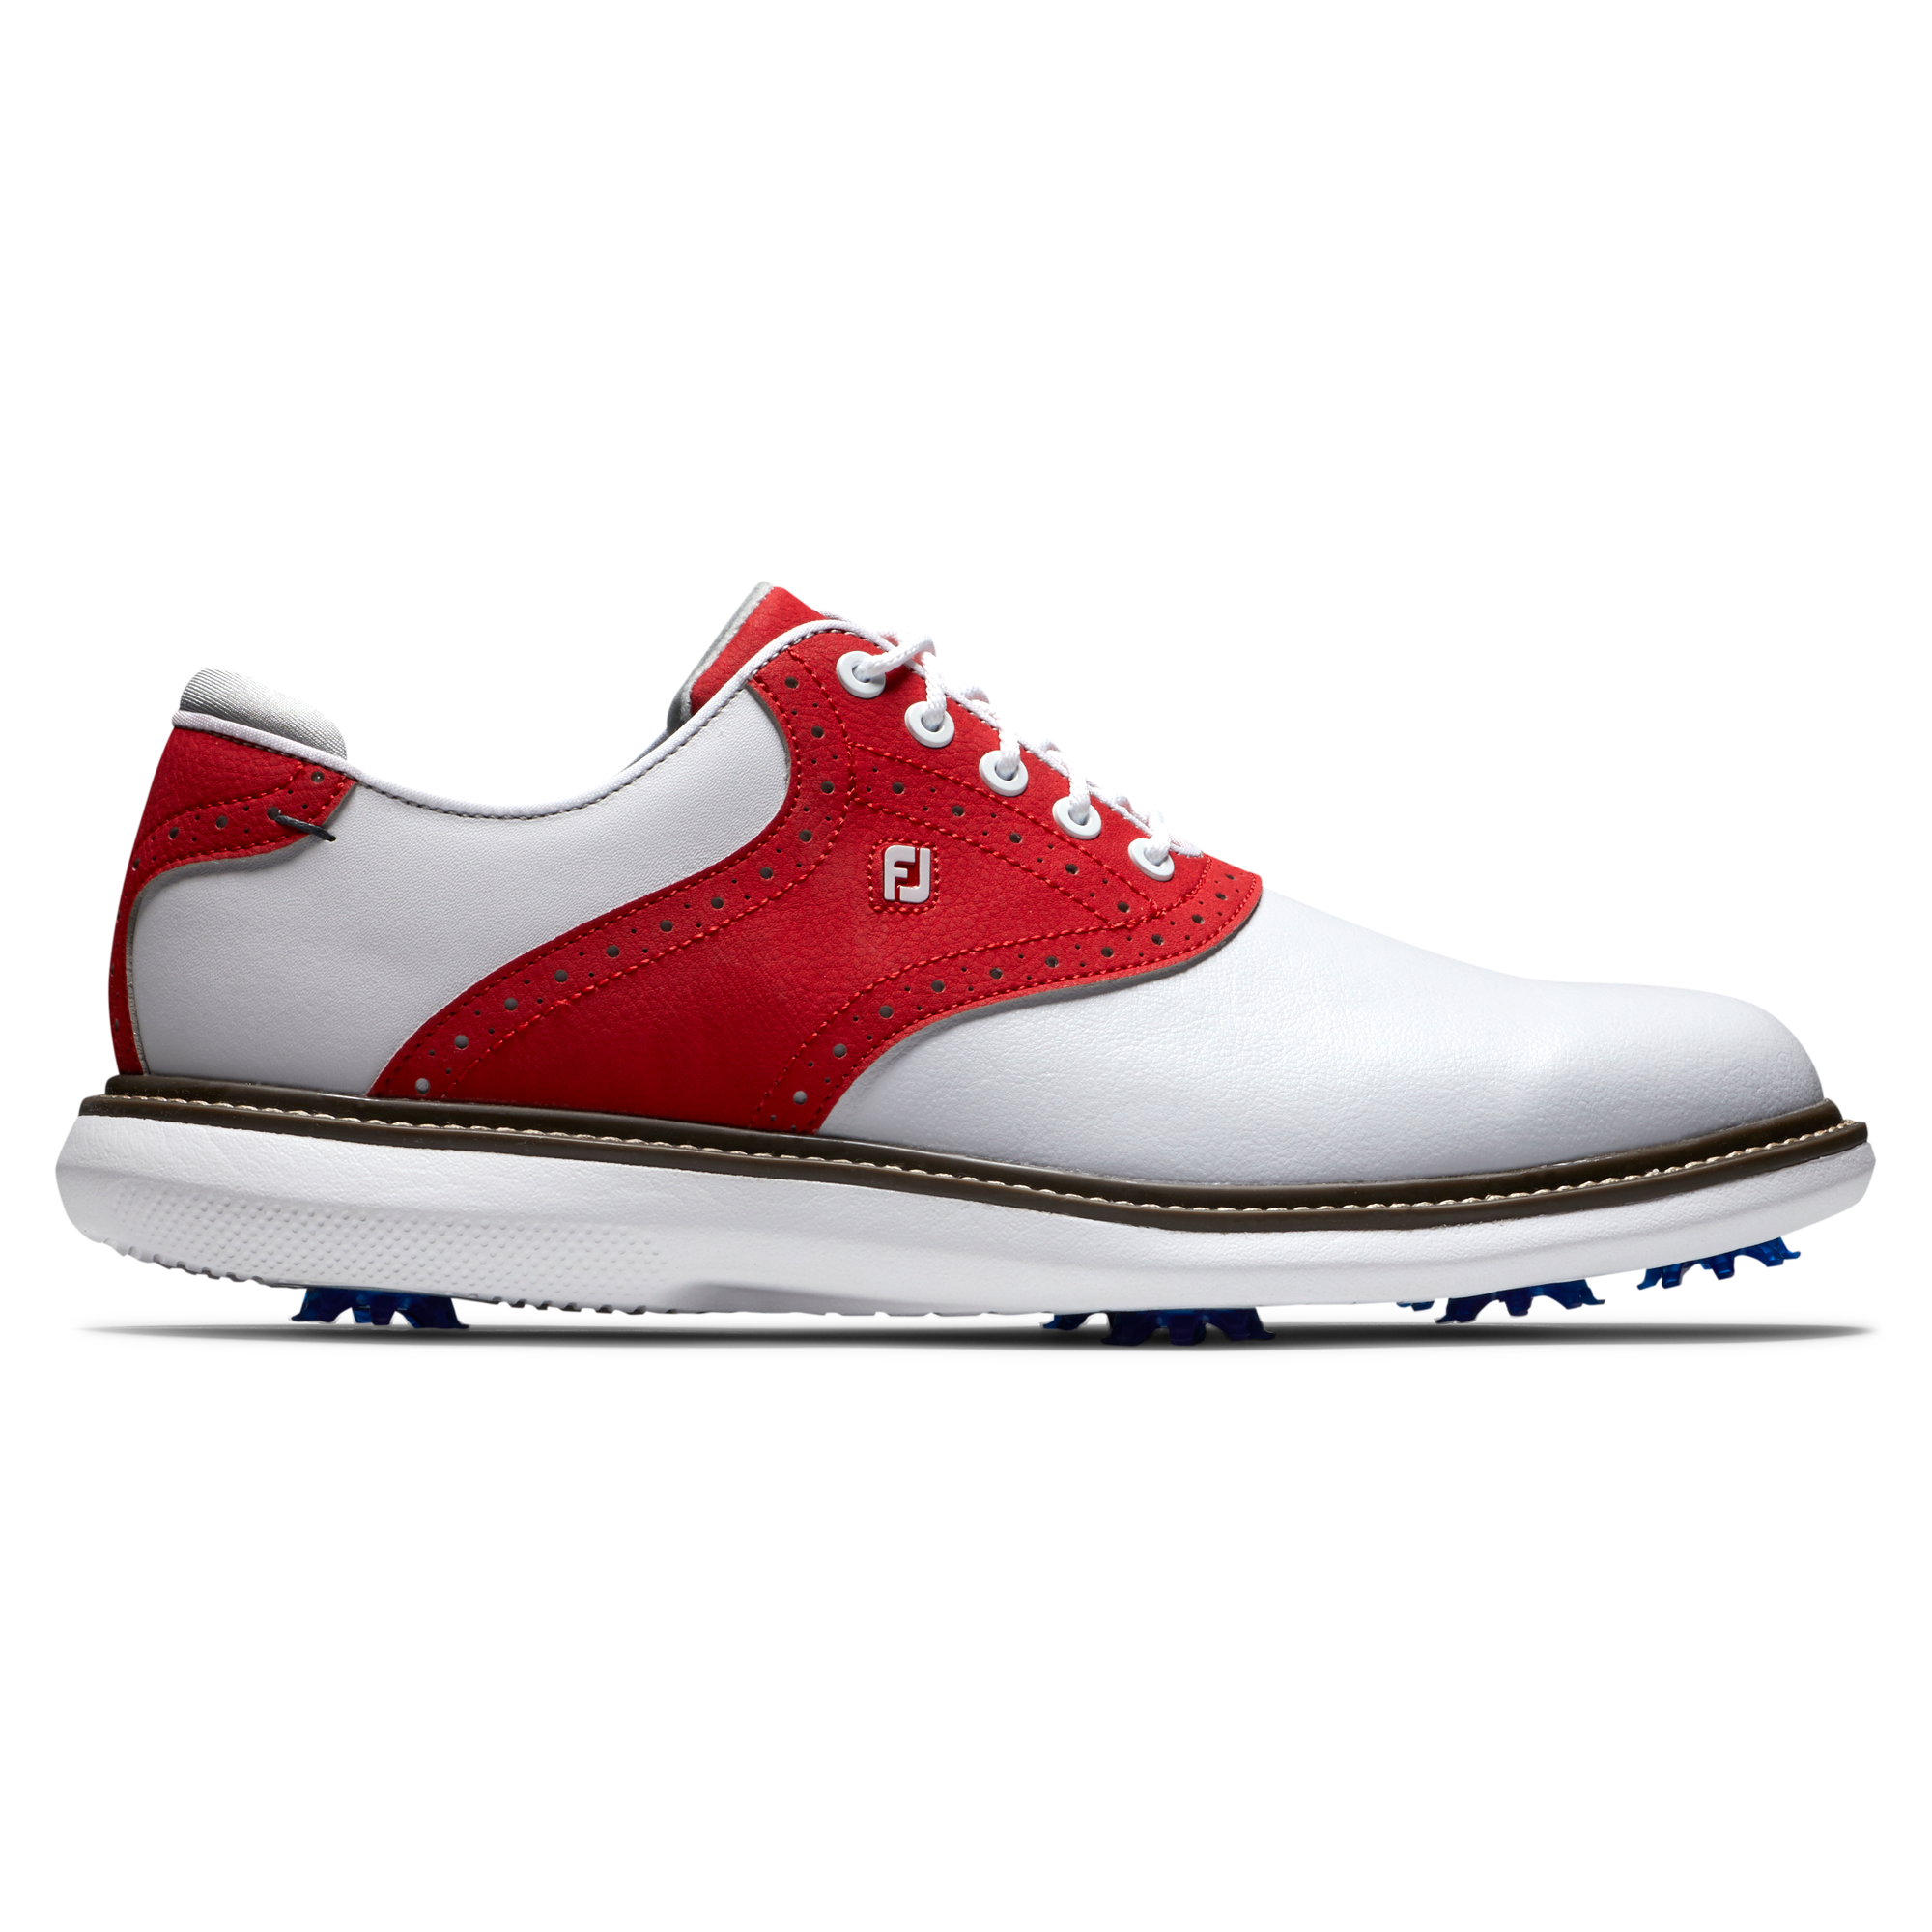 Traditionally Styled Golf Shoe | FJ Traditions Mens | FootJoy IE